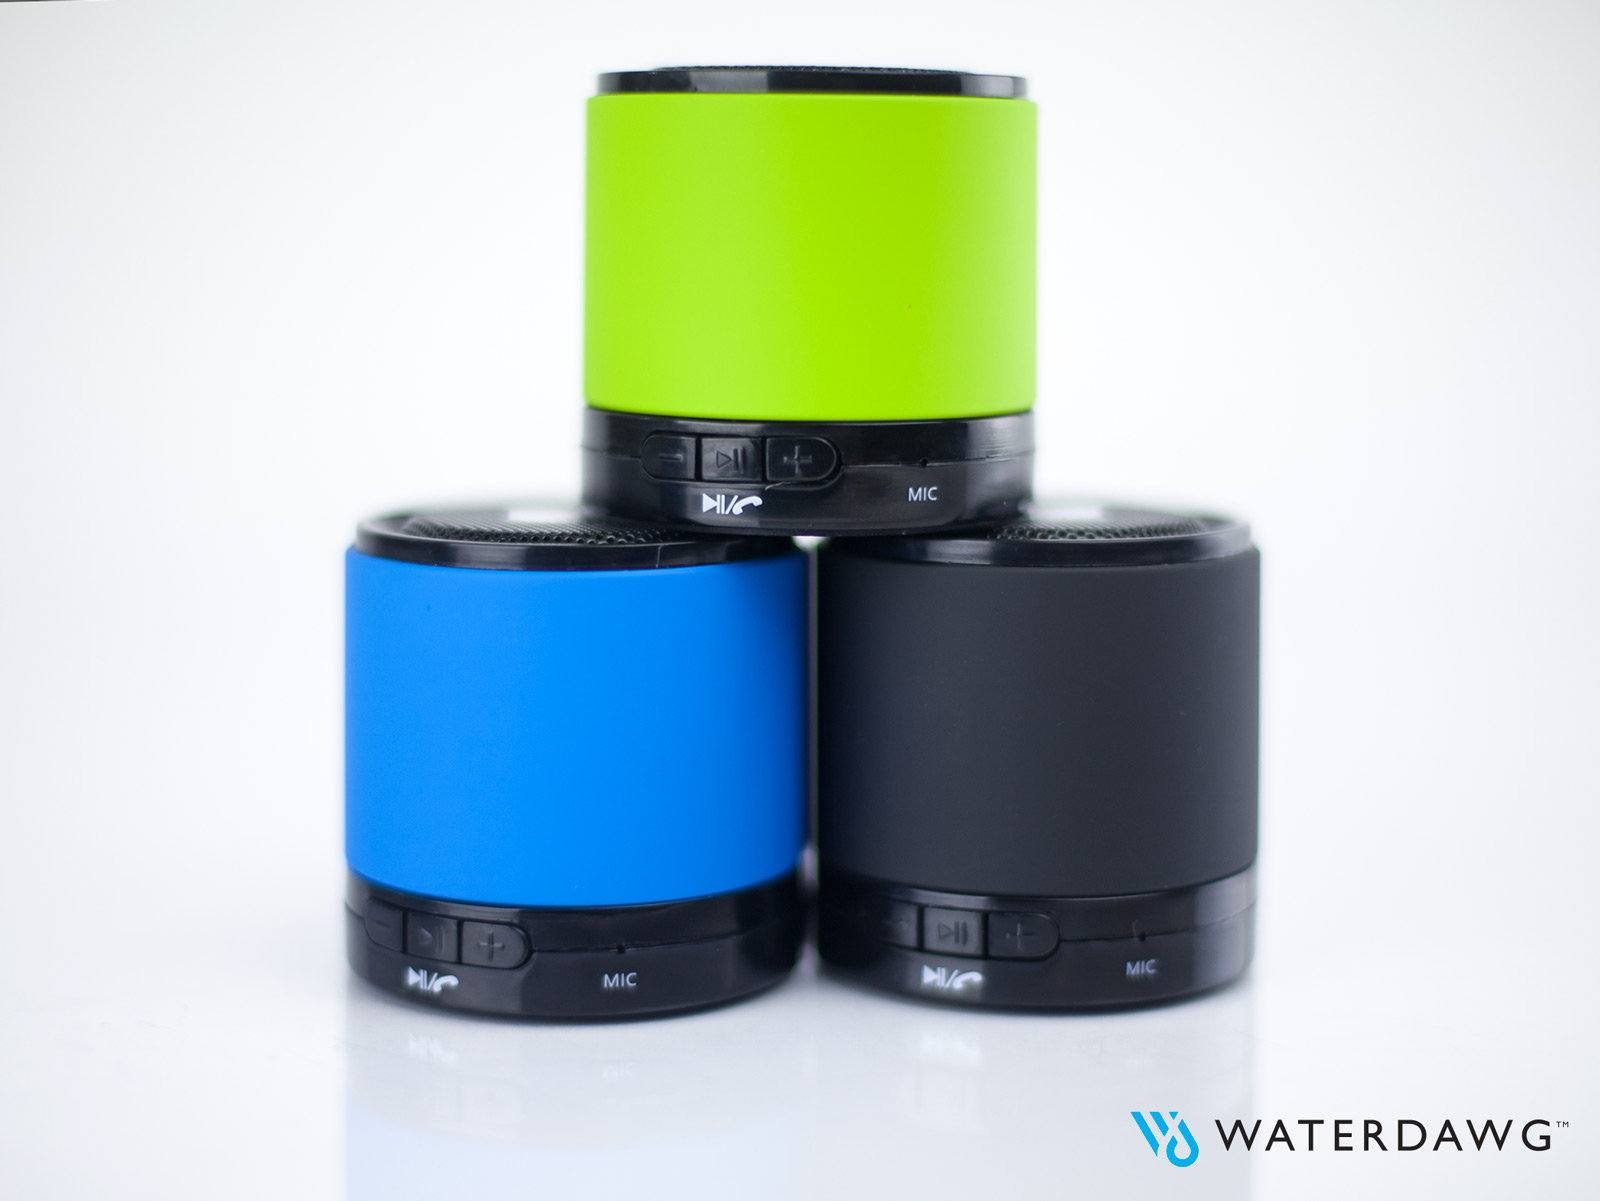 fully submersible speakers